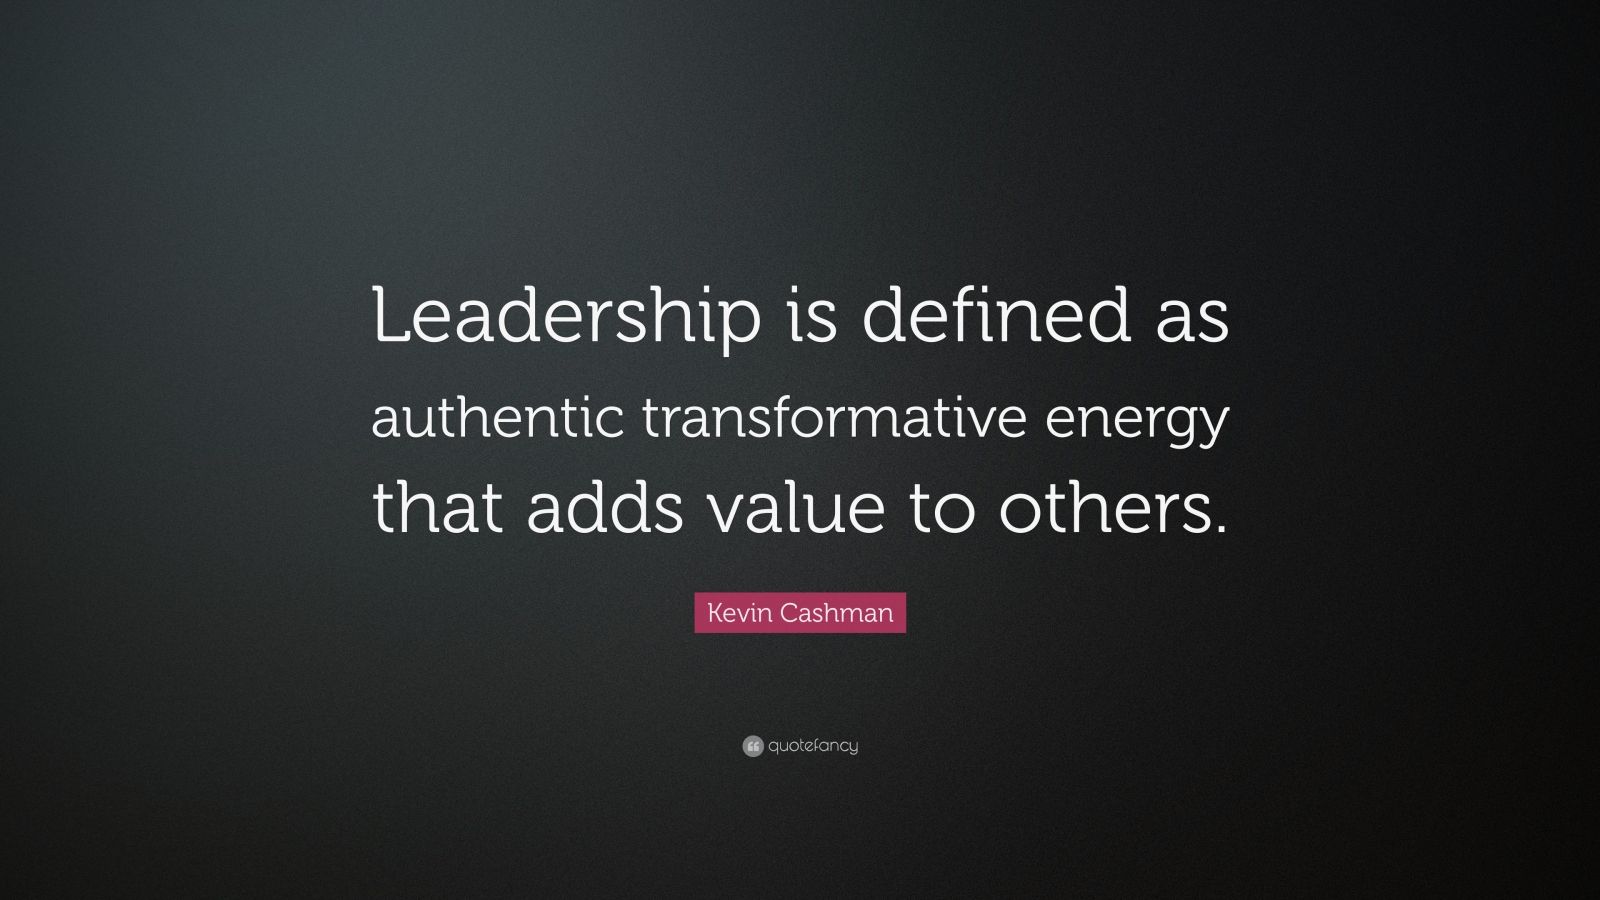 Kevin Cashman Quote: “Leadership is defined as authentic transformative ...